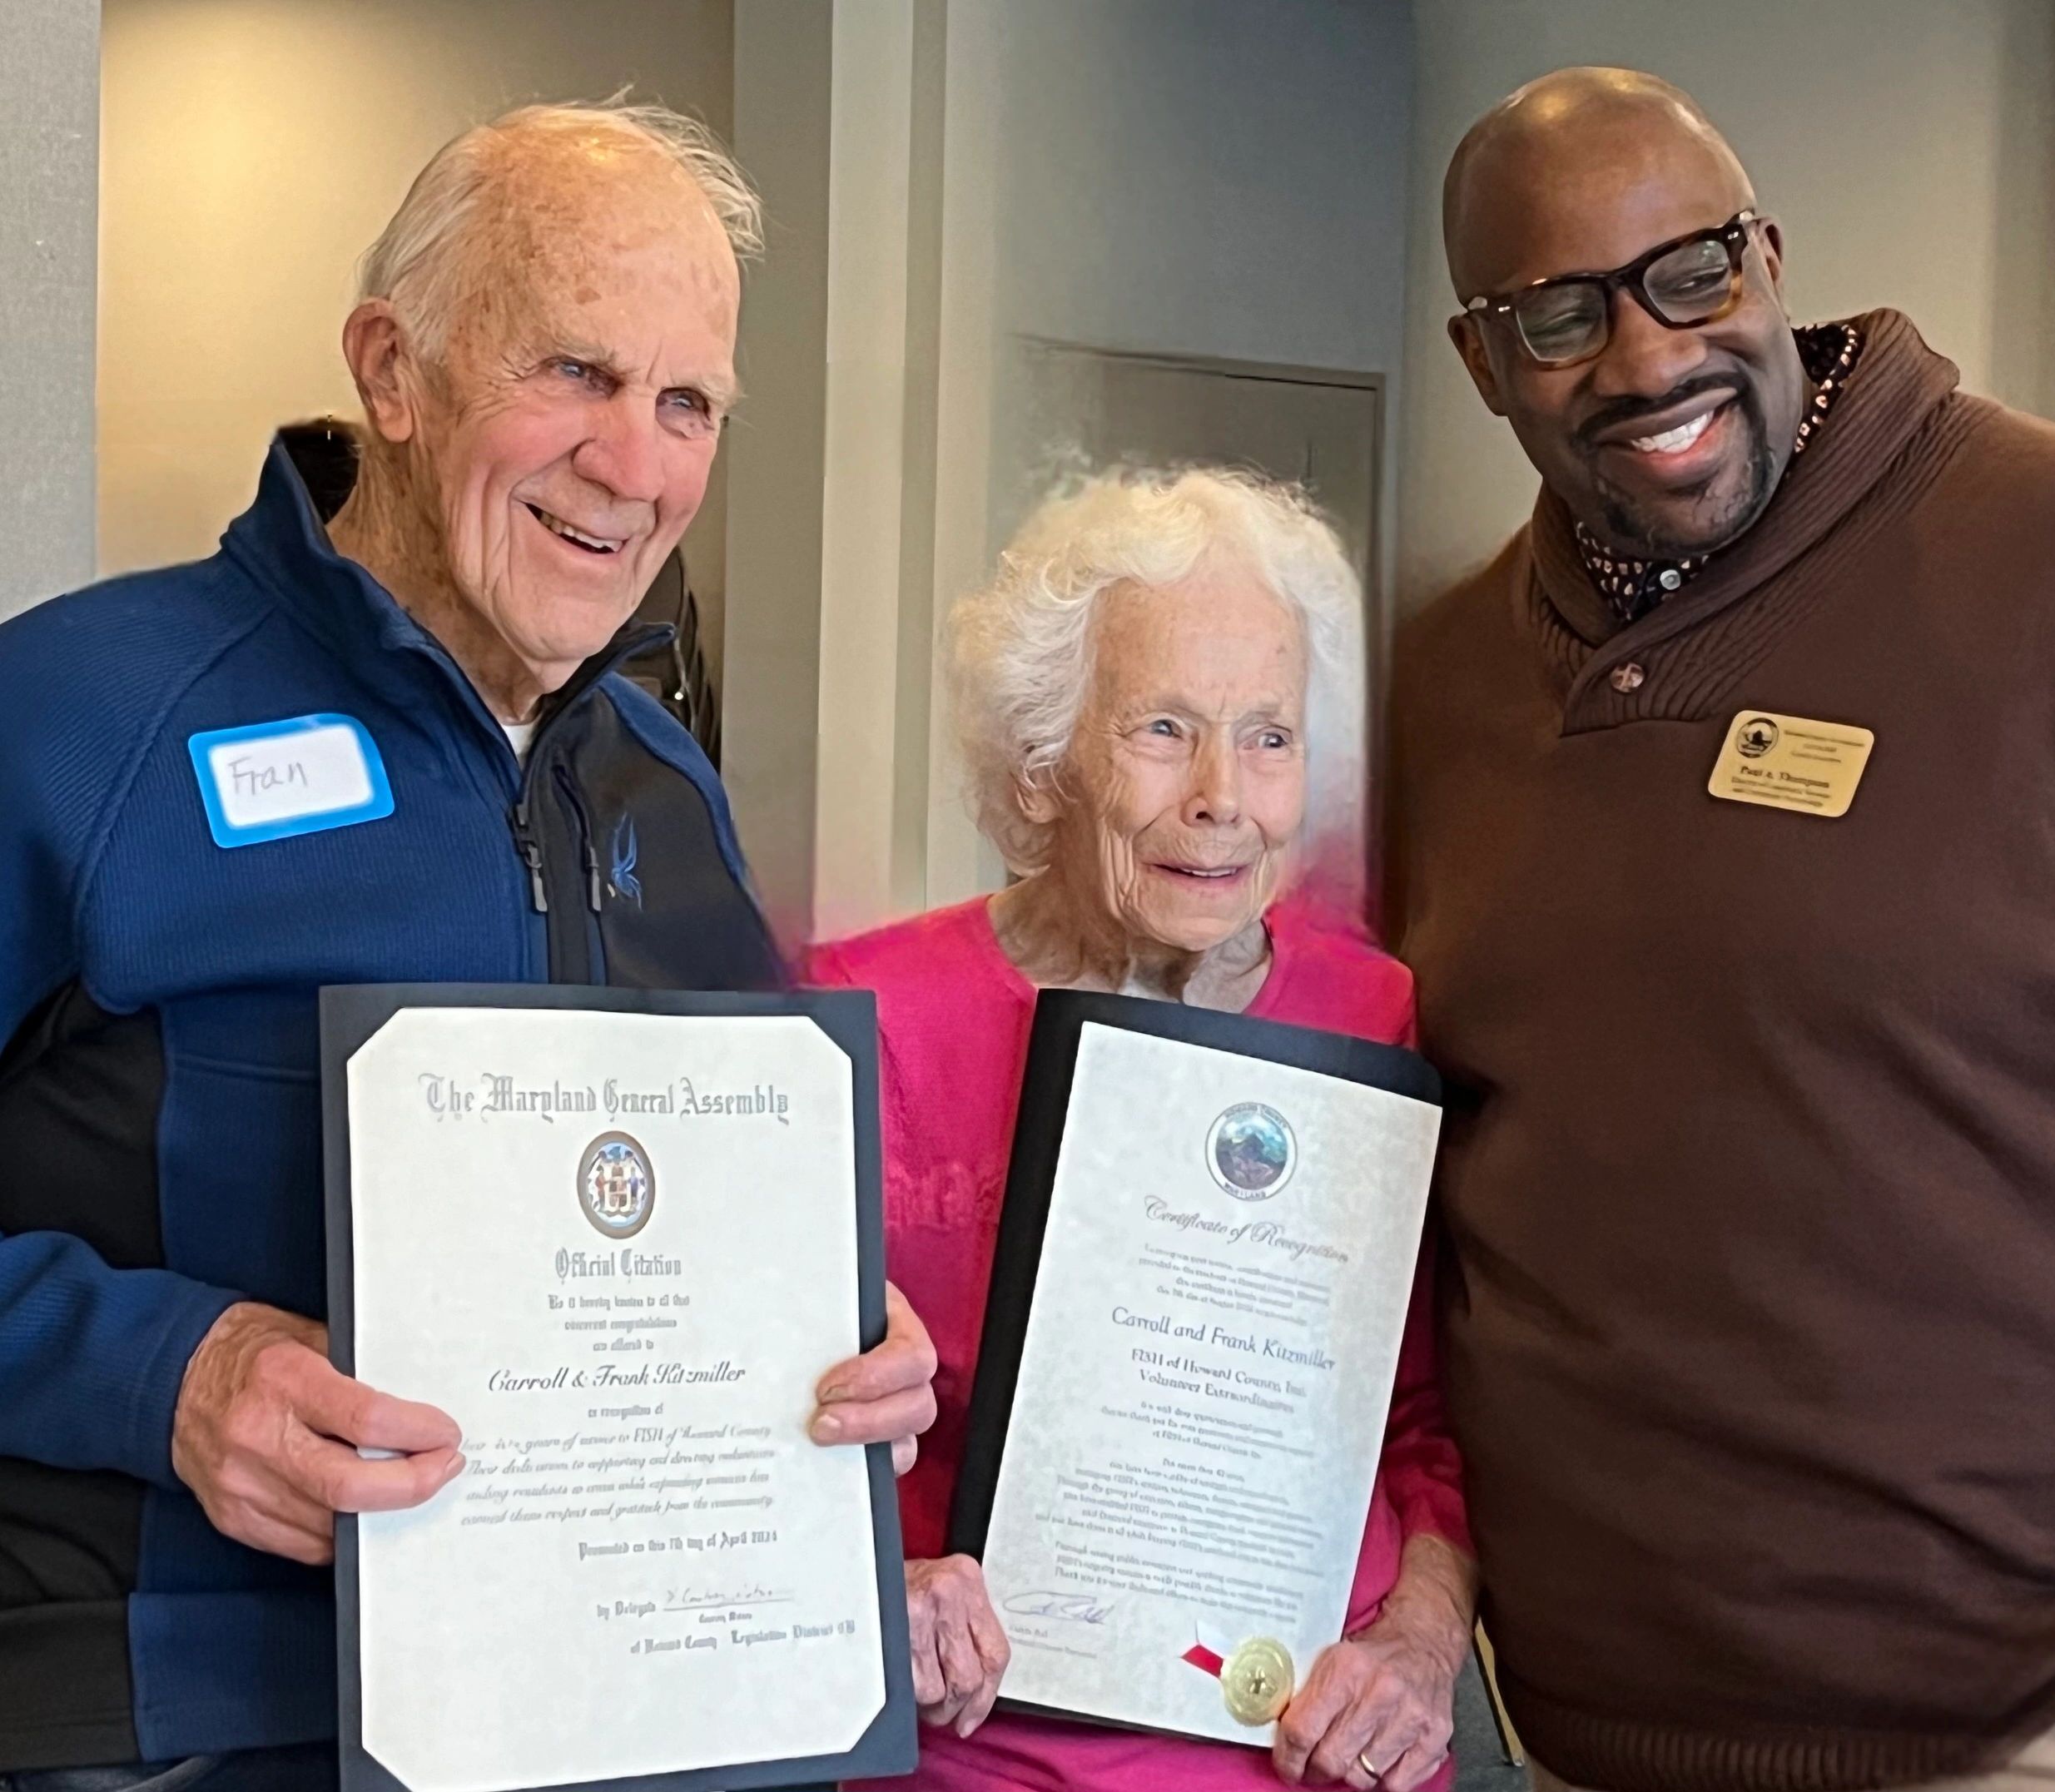 Director Carroll Kitzmiller and spouse Frank honored for many decades of service to the community.  